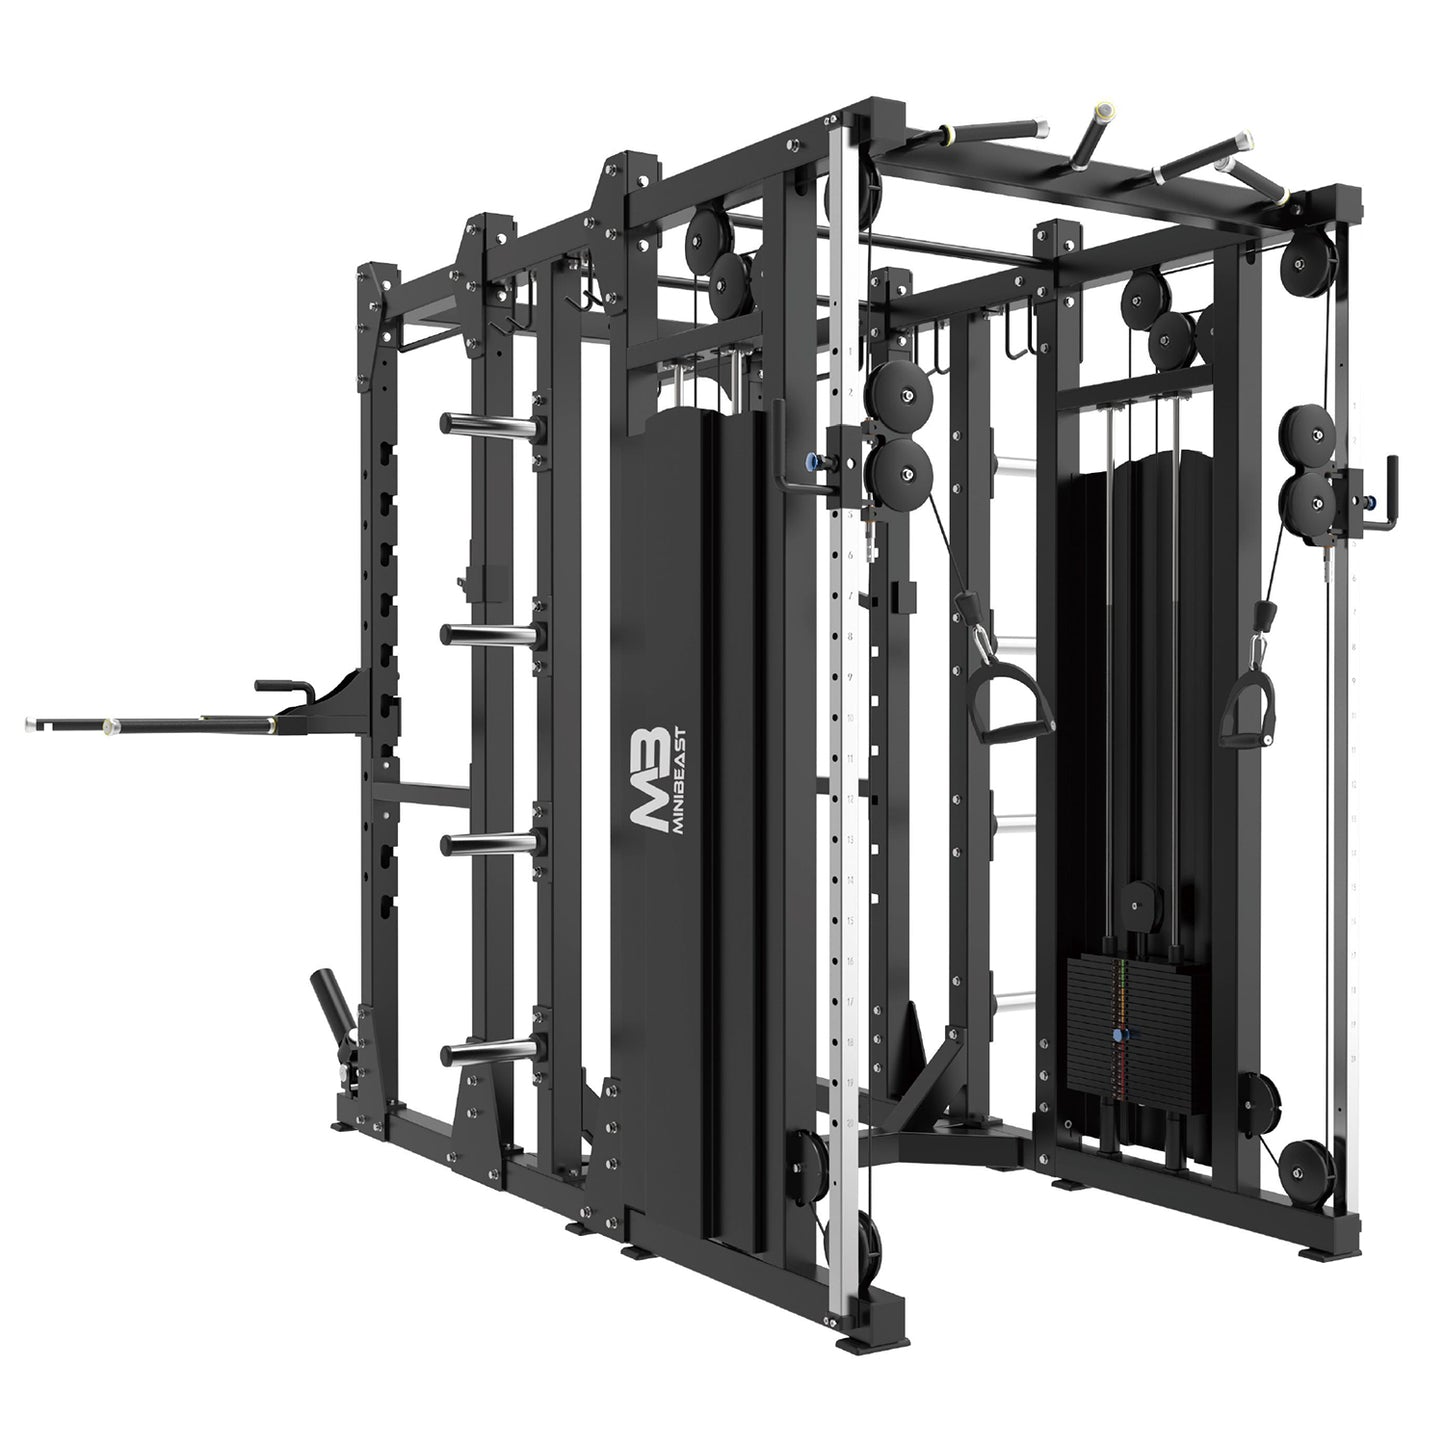 MBTB - Smith with functional trainer squat rack 3 in one